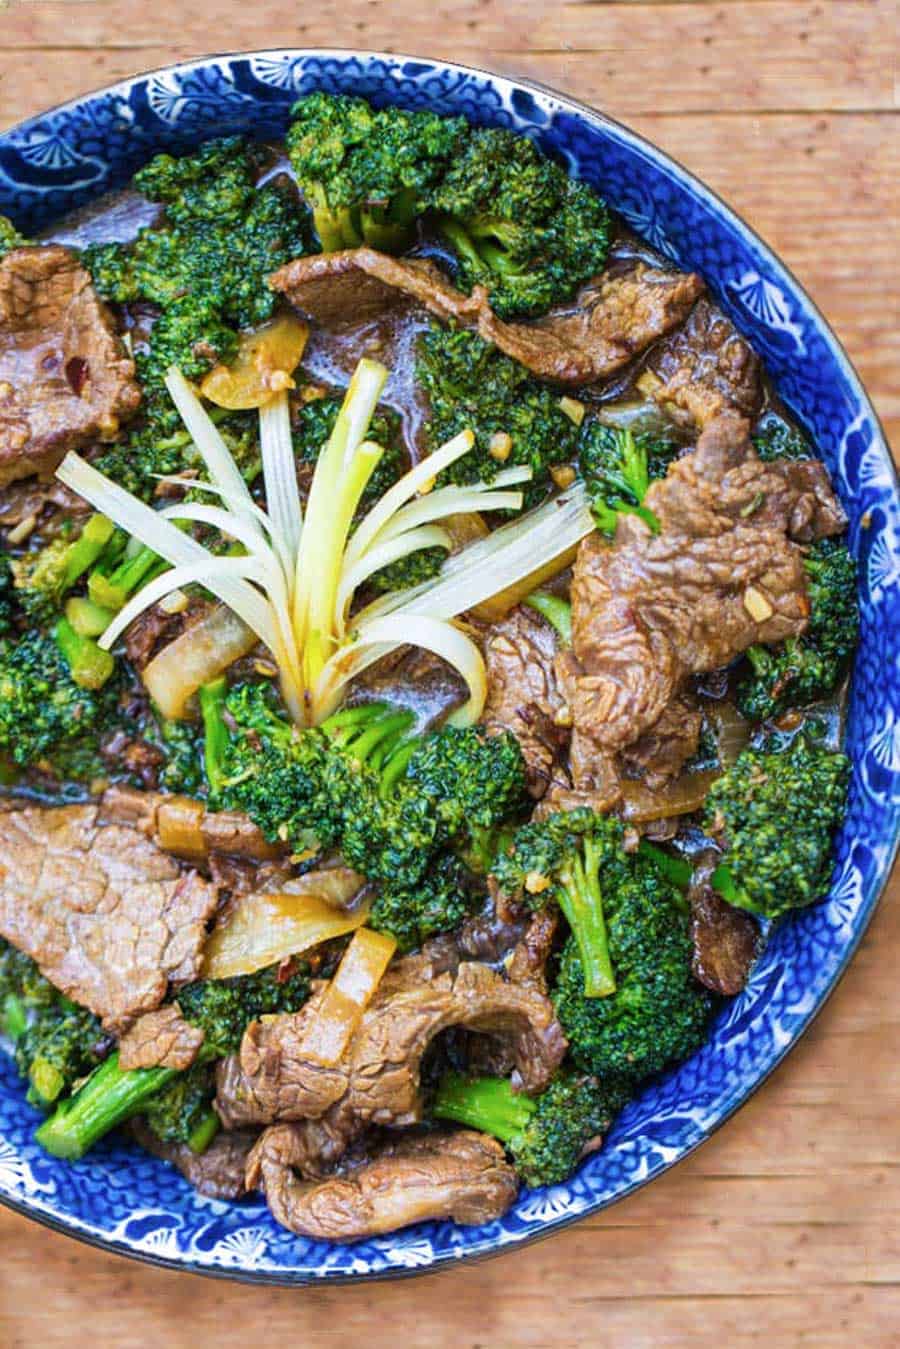  overhead shot showing a blue bowl filled with Chinese beef and broccoli stir fry. A spray of scallions in the center to garnish